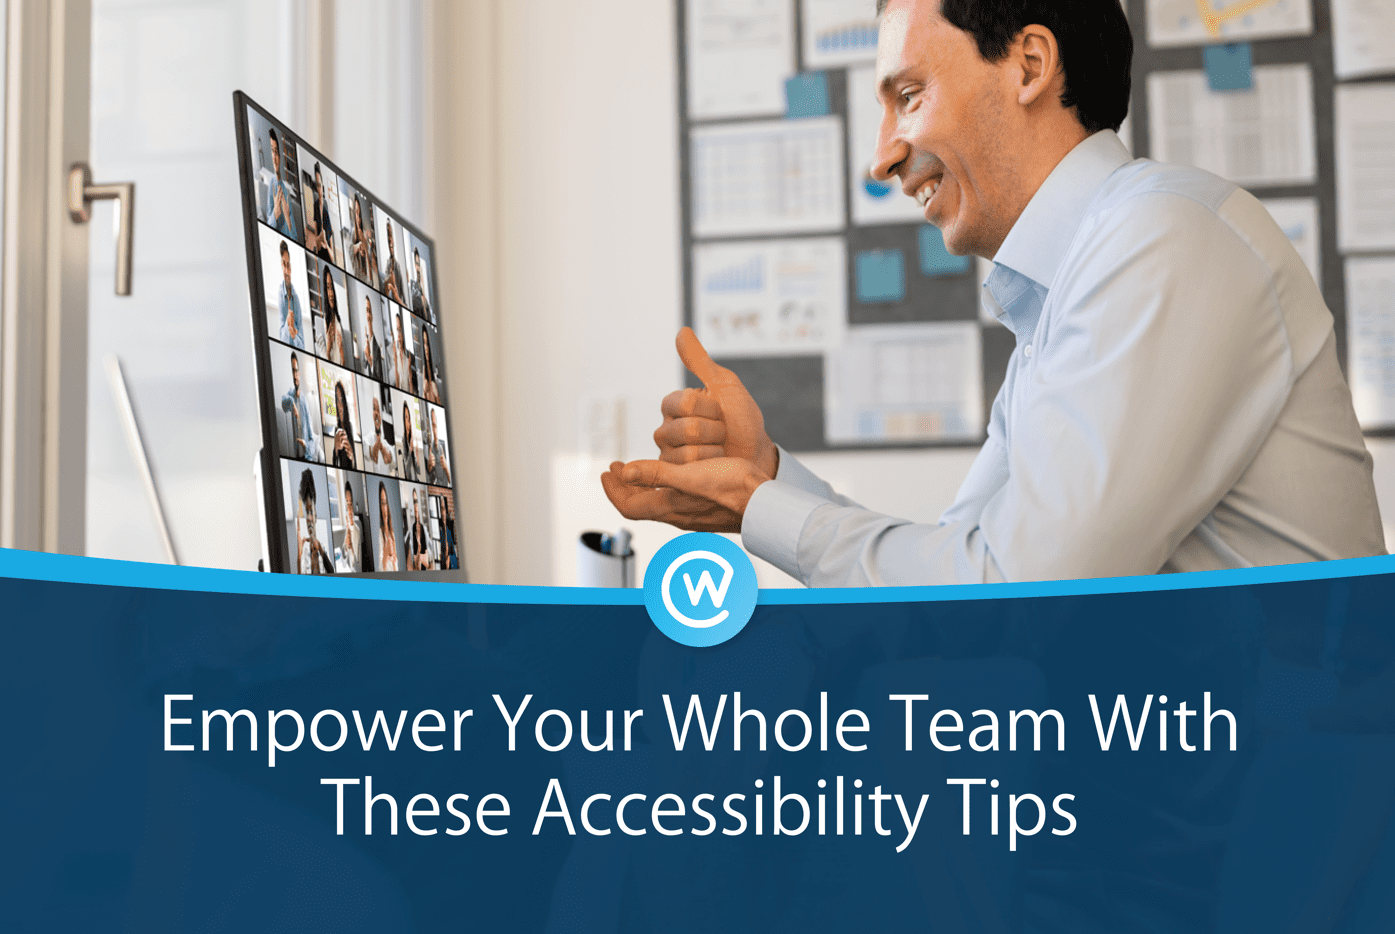 Empower Your Whole Team With These Accessibility Tips